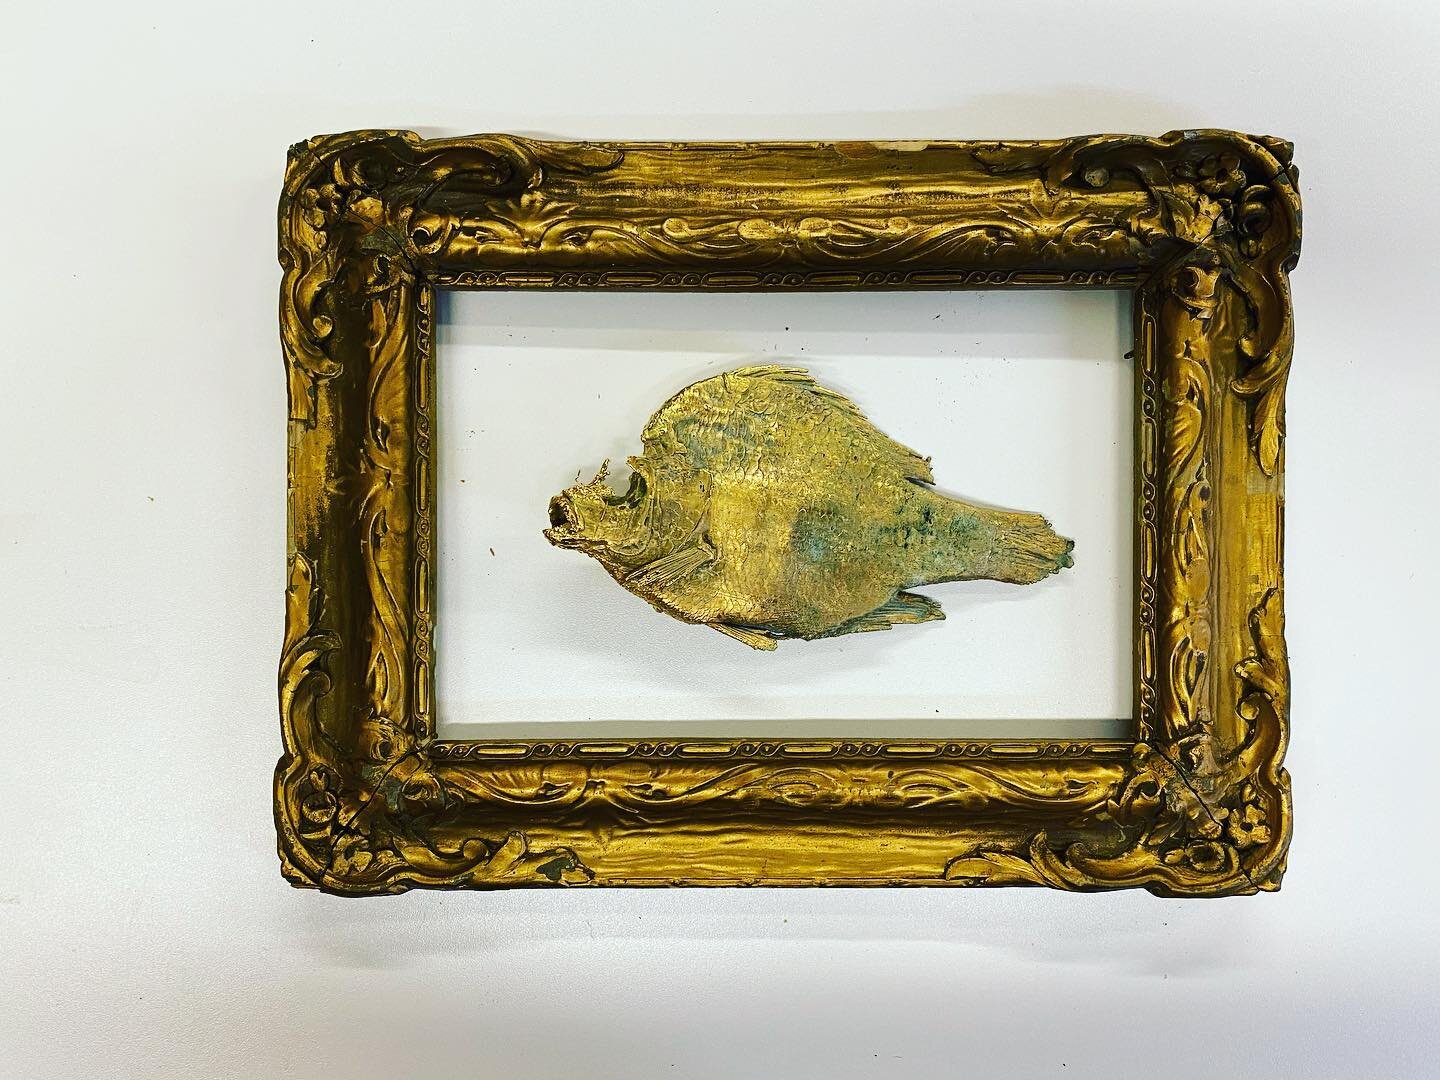 New commission. Gold plated sunfish from lake Champlain, antique frame. Thanks to @cuskulls for the amazing job. More to come....